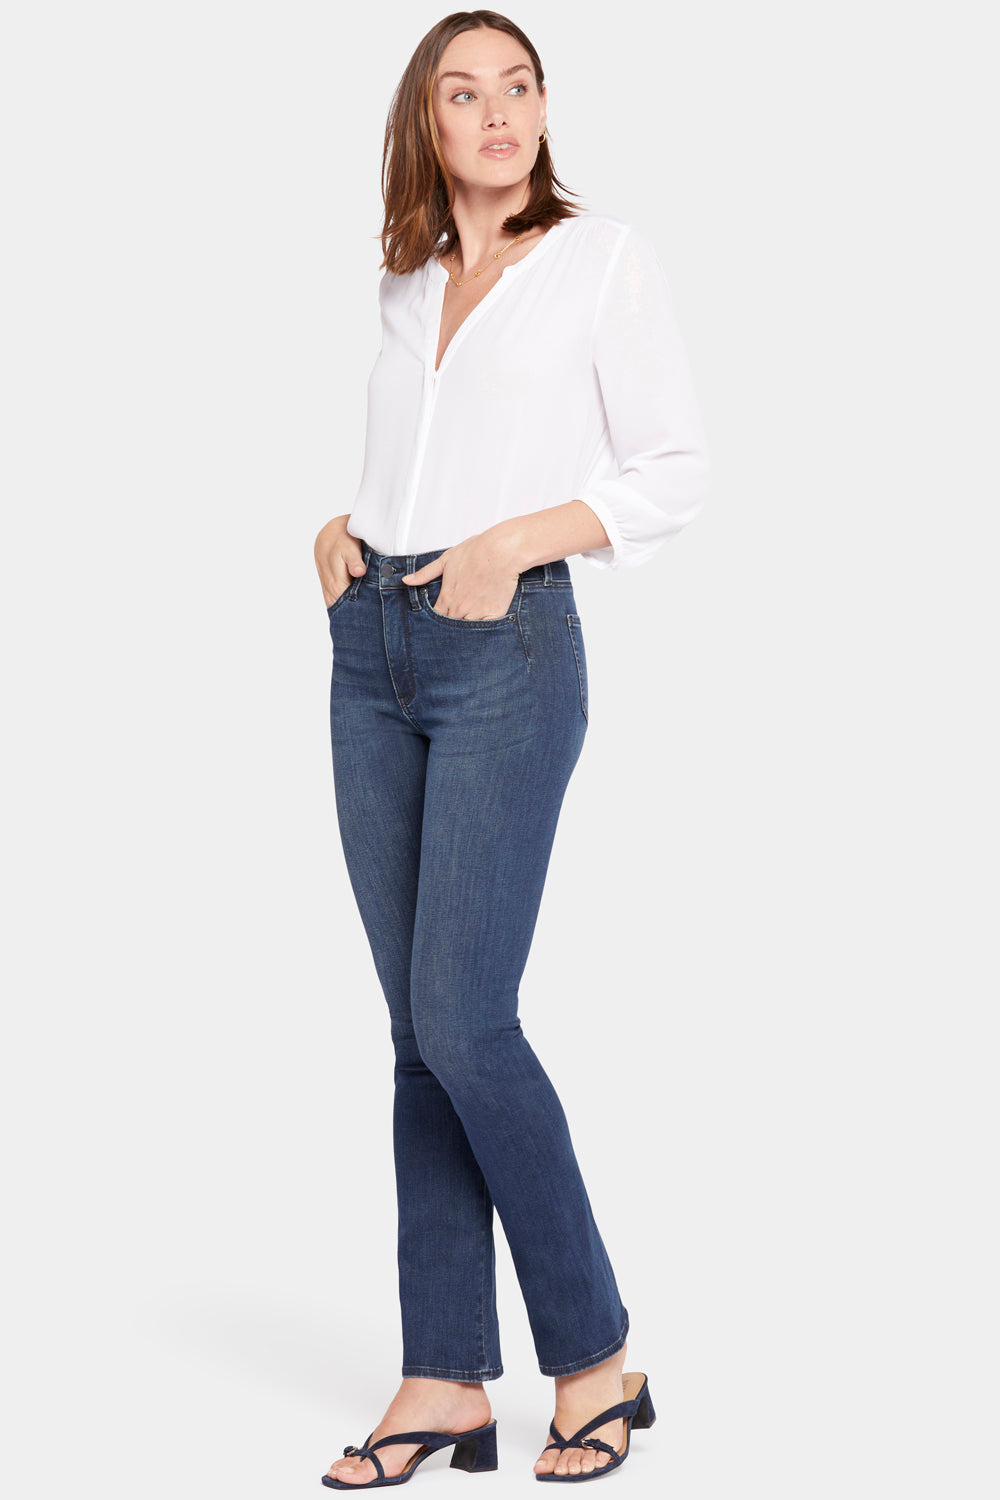 Mid Rise Jeans for Women